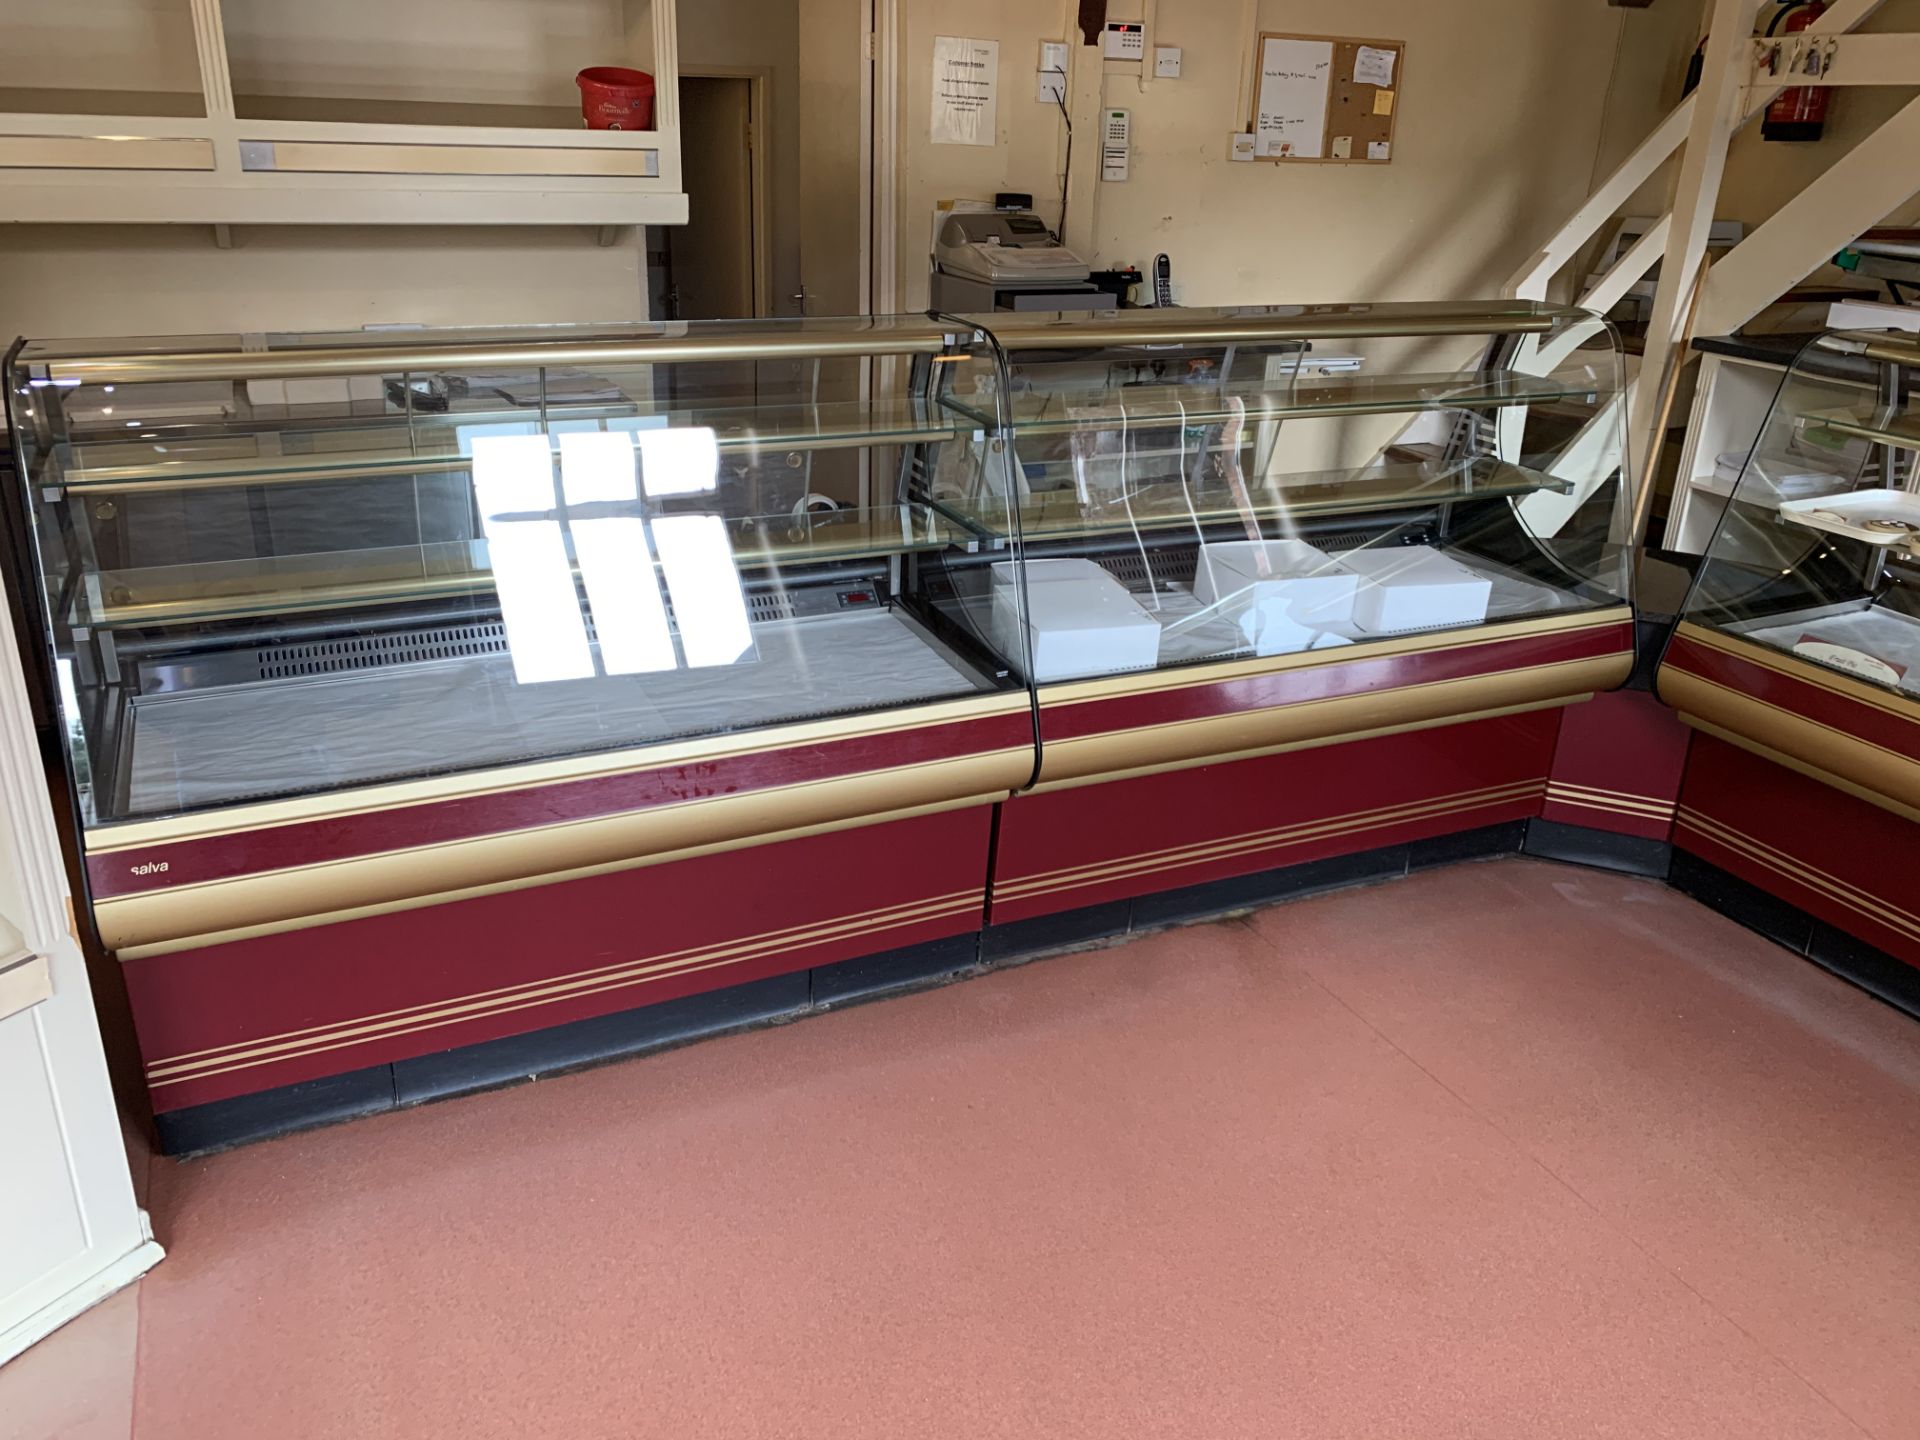 4 Section L shaped Glazed Counter Refrigerated Display Cabinet System - Image 3 of 7